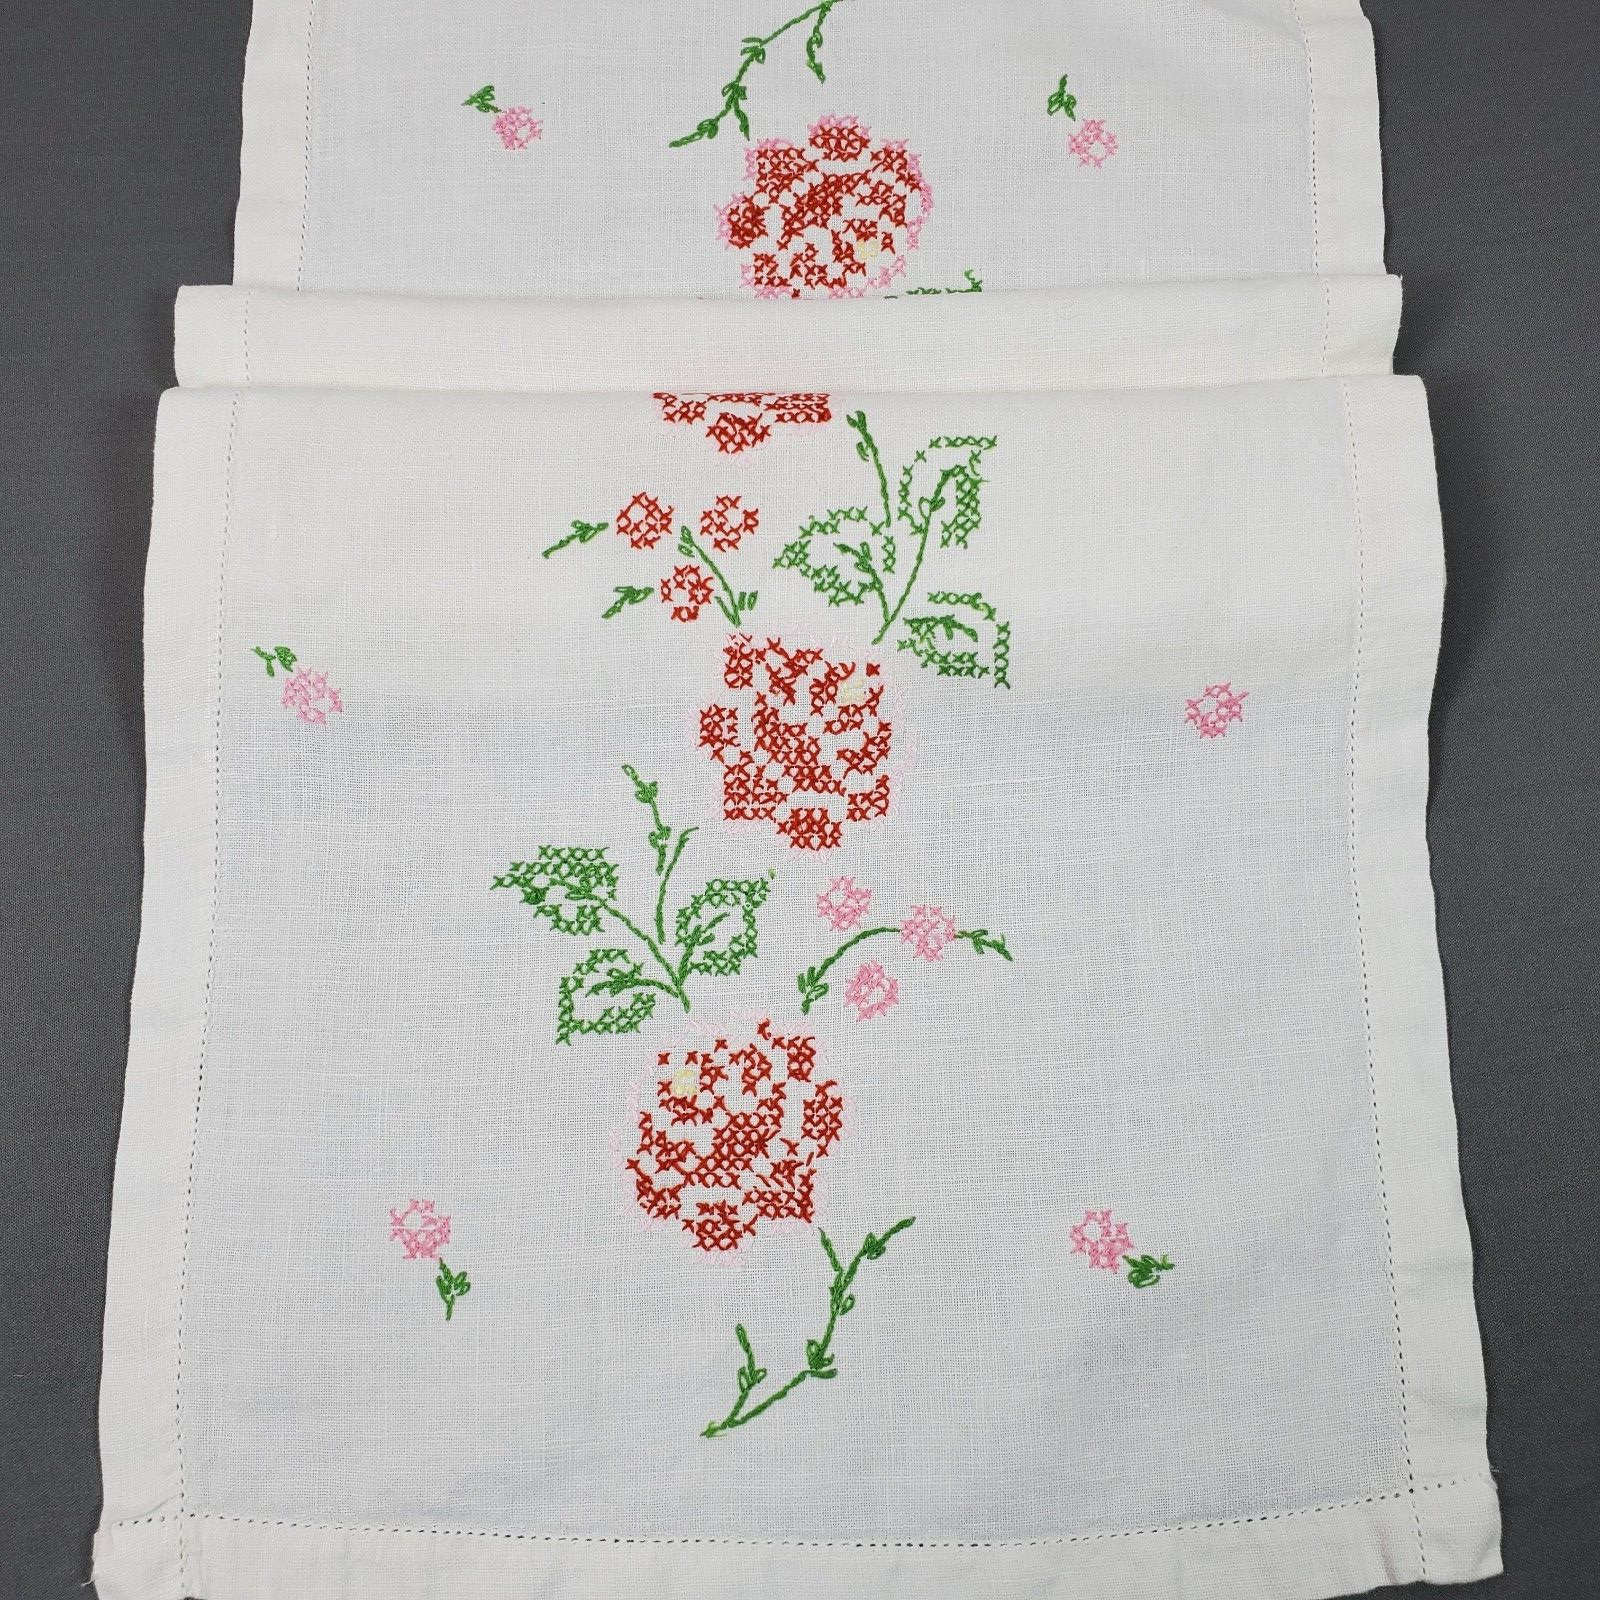 Vintage Hand Crafted Cross Stitch Table Runner 13x36 Inch Red Pink Rose